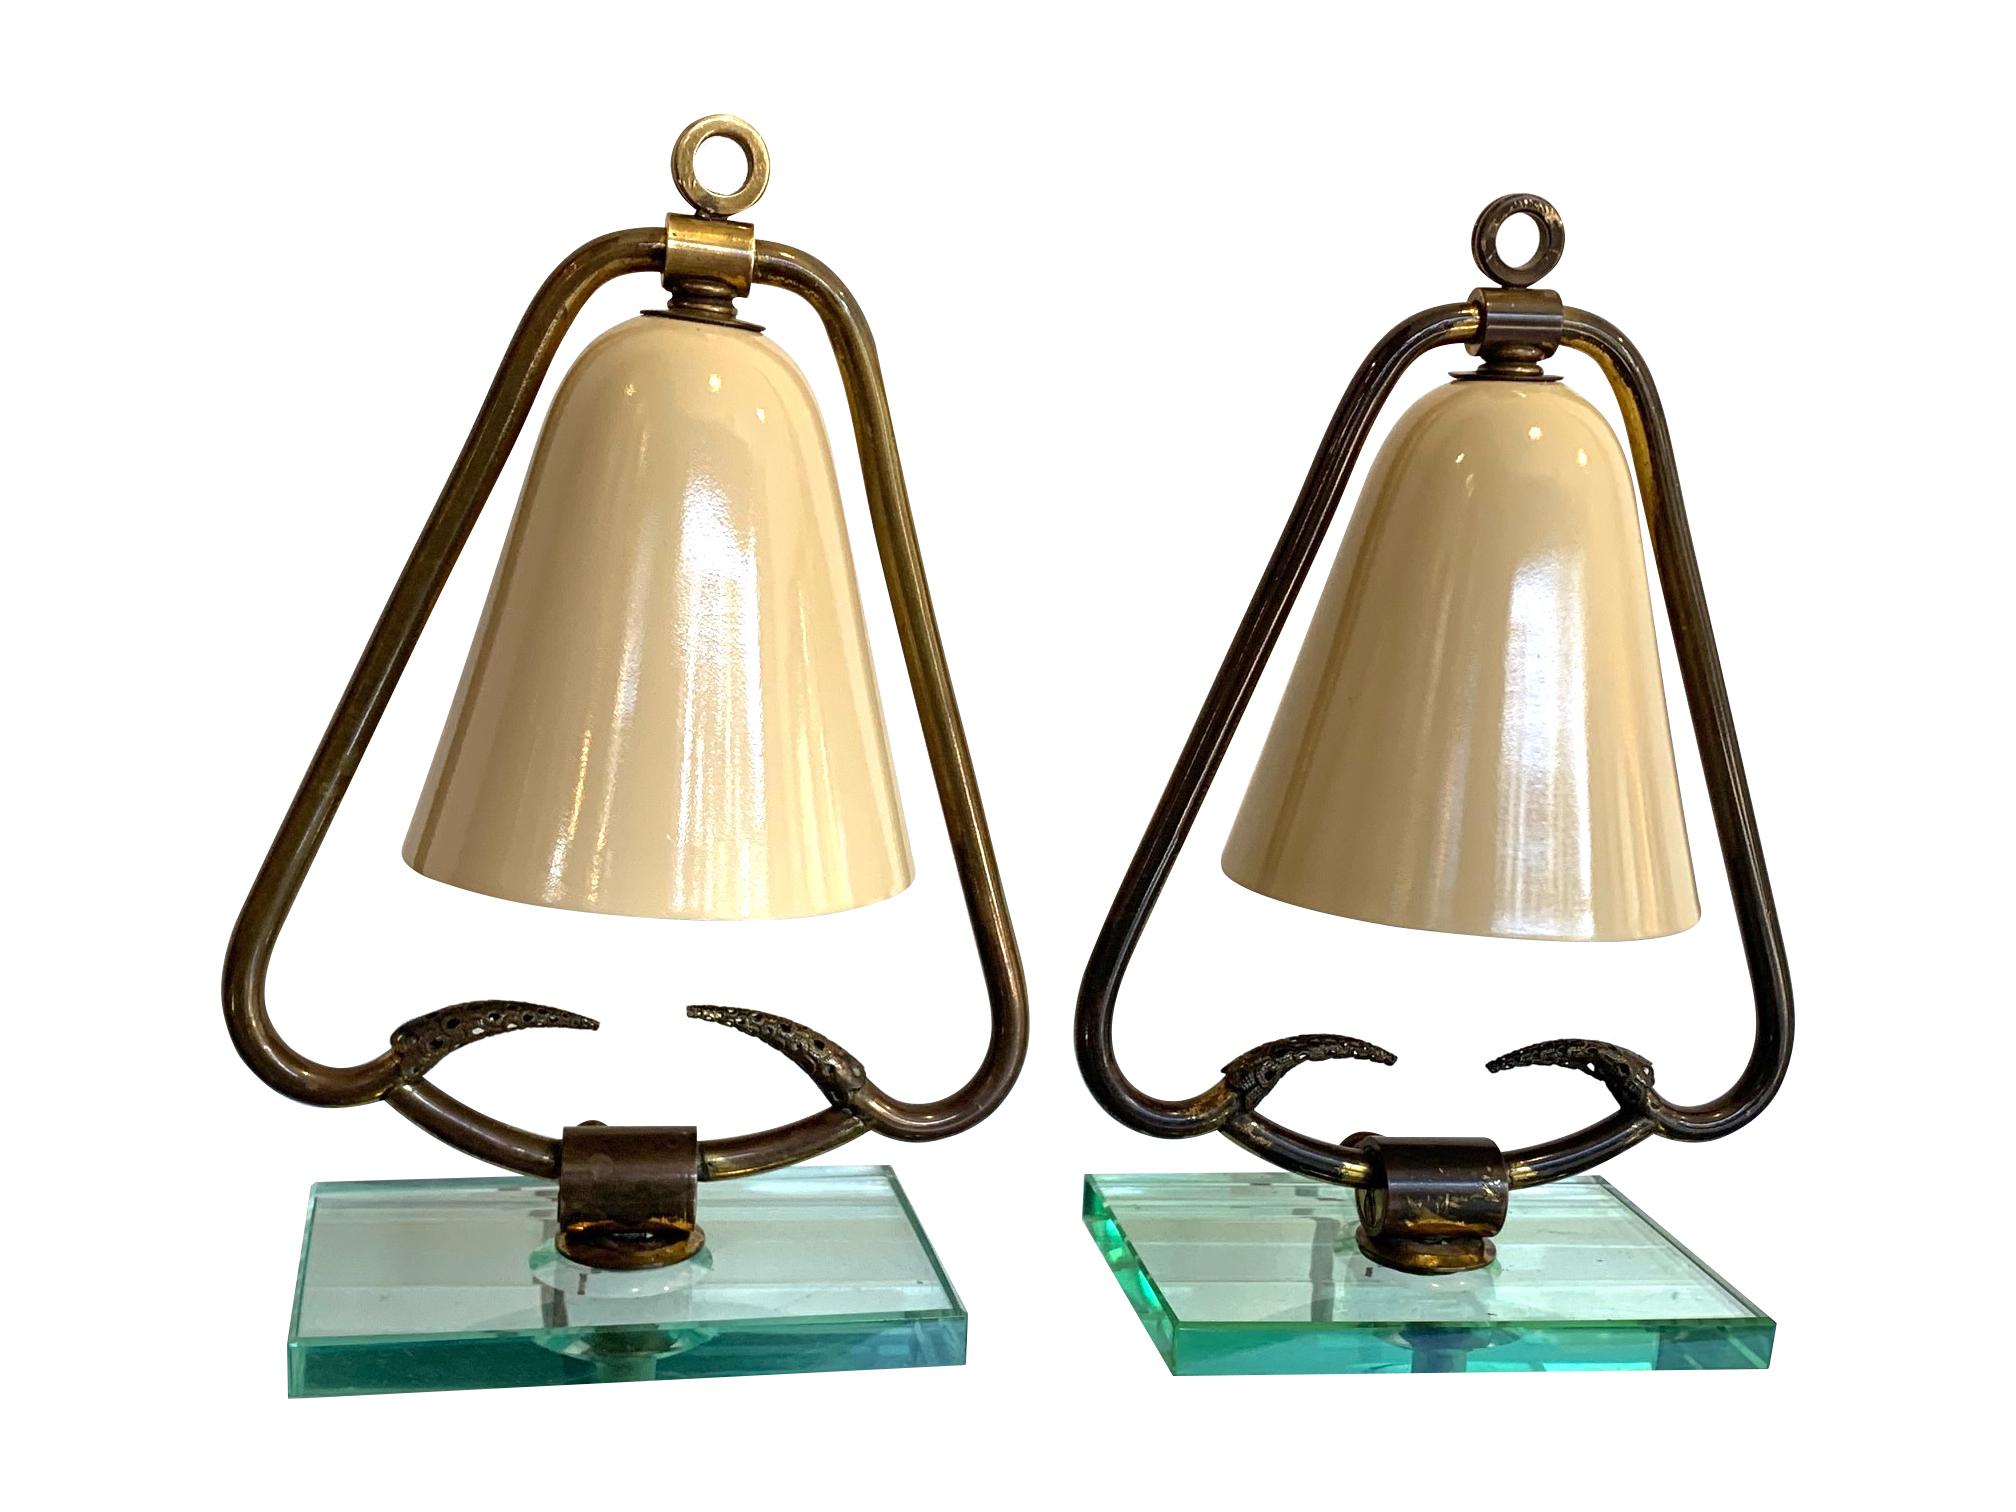 Pair of 1950s Italian Lamps with Enamel Shades on Brass Frame Mounted on Glass 2